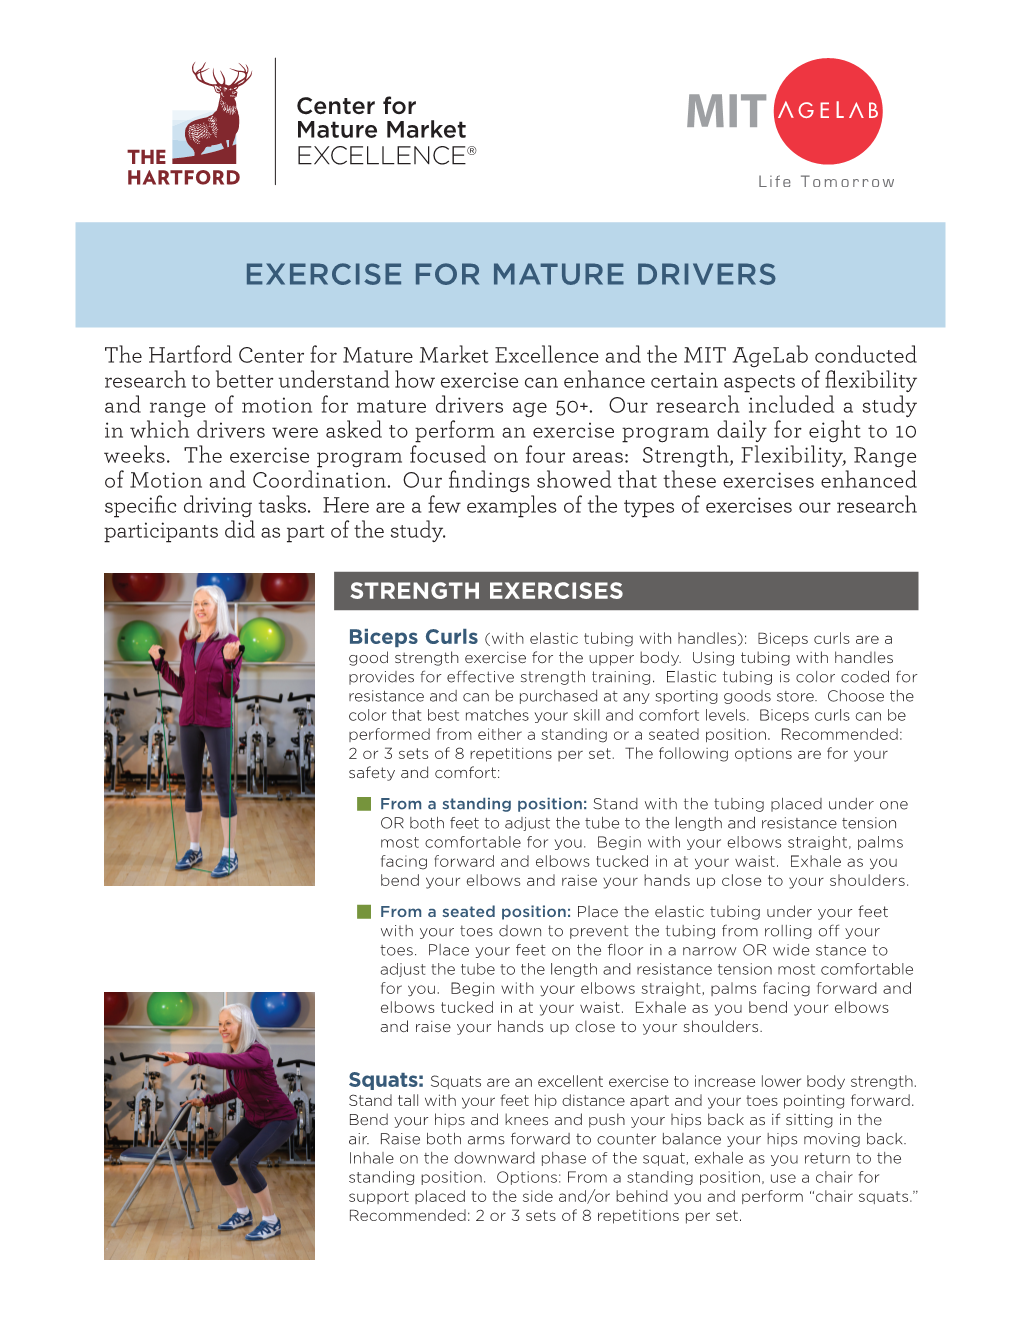 Exercise for Mature Drivers